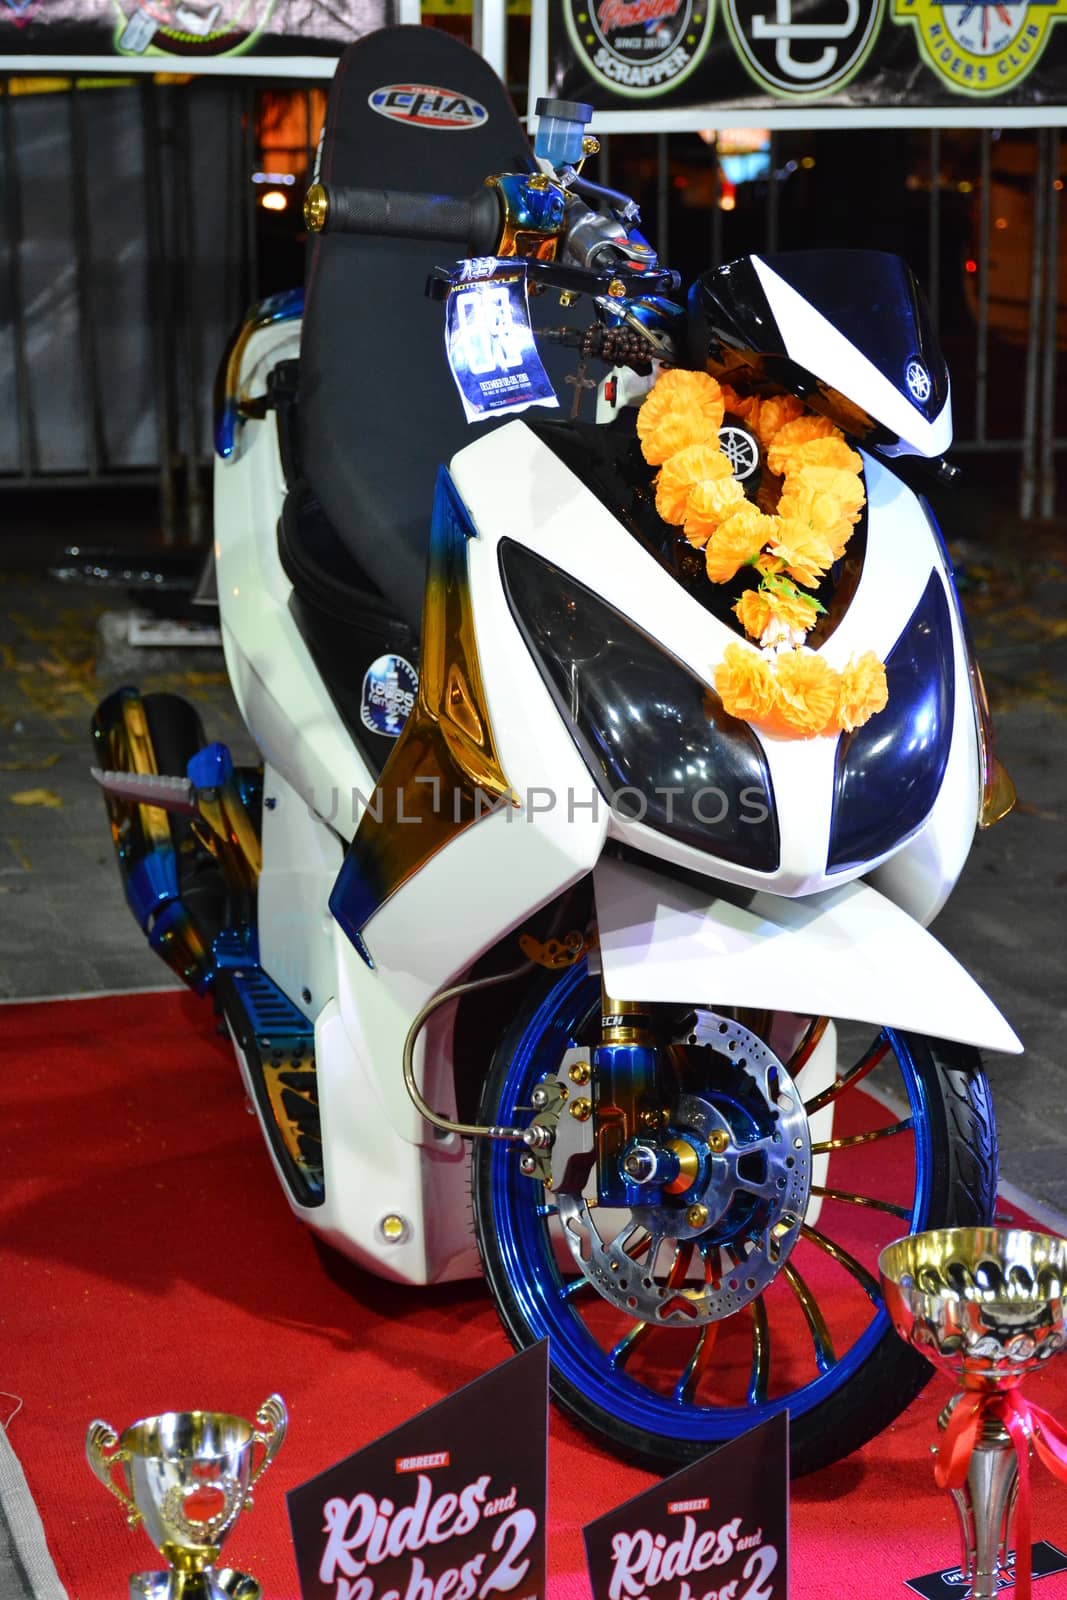 PASAY, PH - DEC 8 - Yamaha motorcycle at Bumper to Bumper car show on December 8, 2018 in Pasay, Philippines.